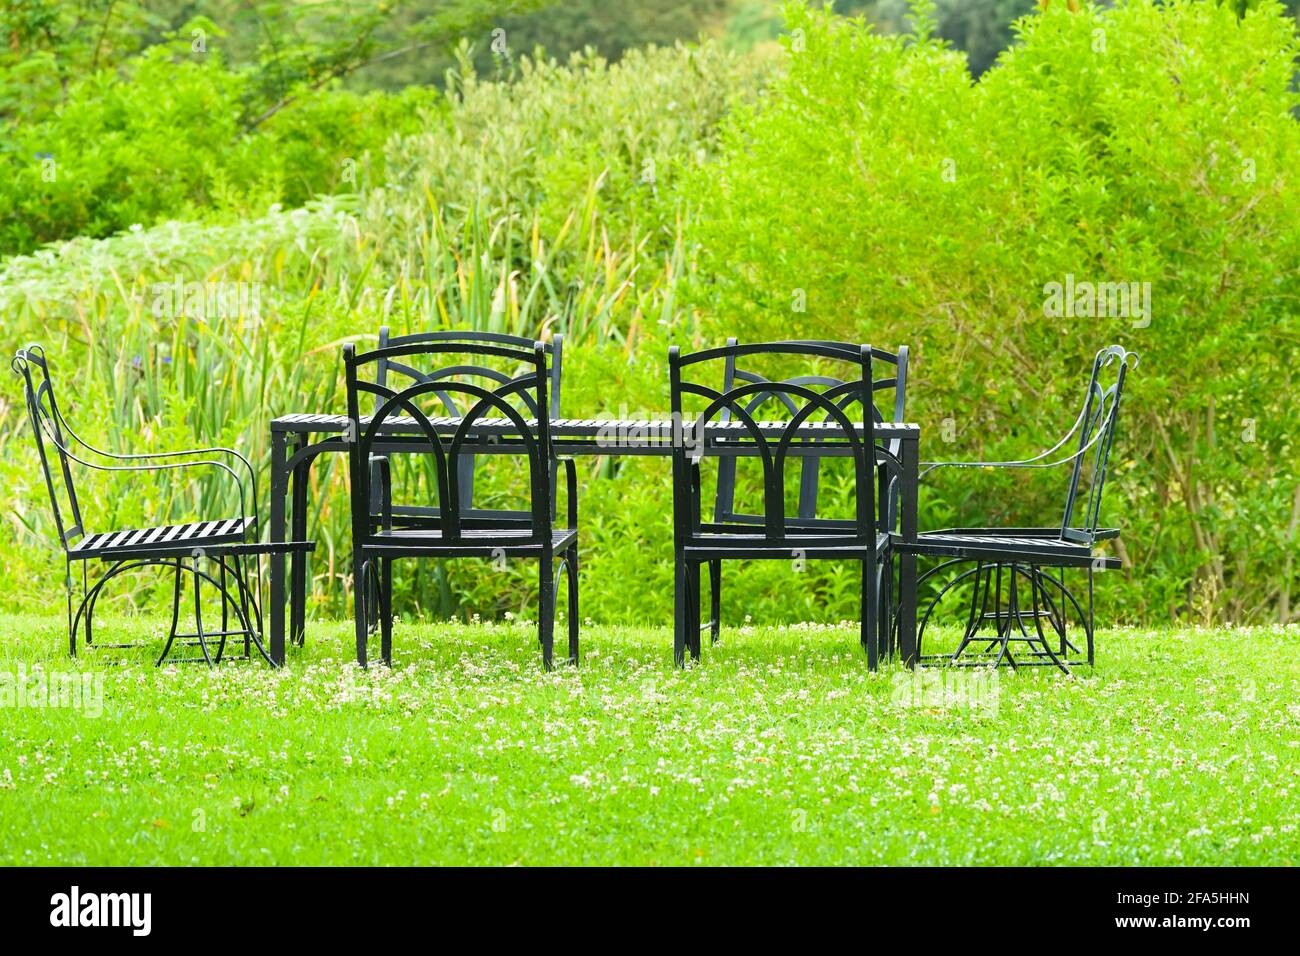 table and chairs with no people on the grass in a garden or park setting to be used as alfresco dining or a picnic area outdoors Stock Photo